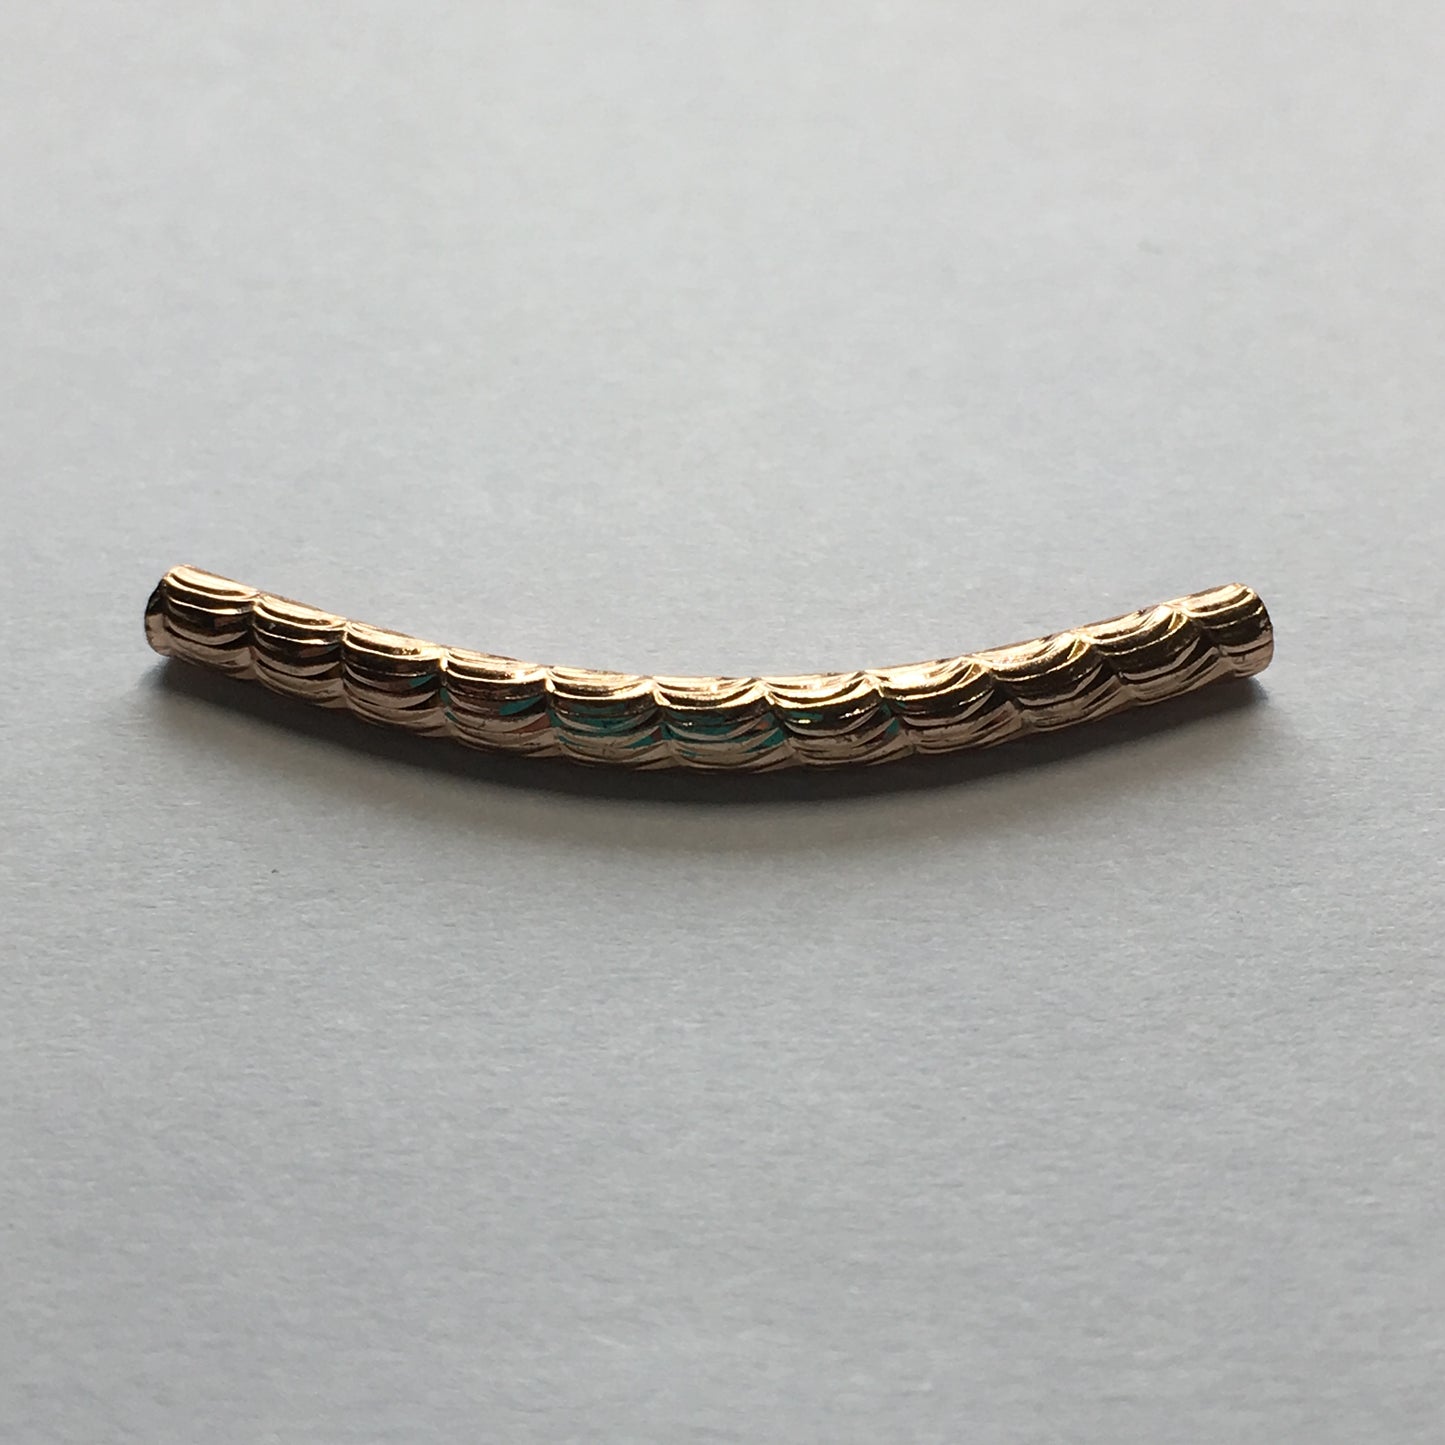 Rose Gold Textured Curved Tube Bead 3 x 35 mm